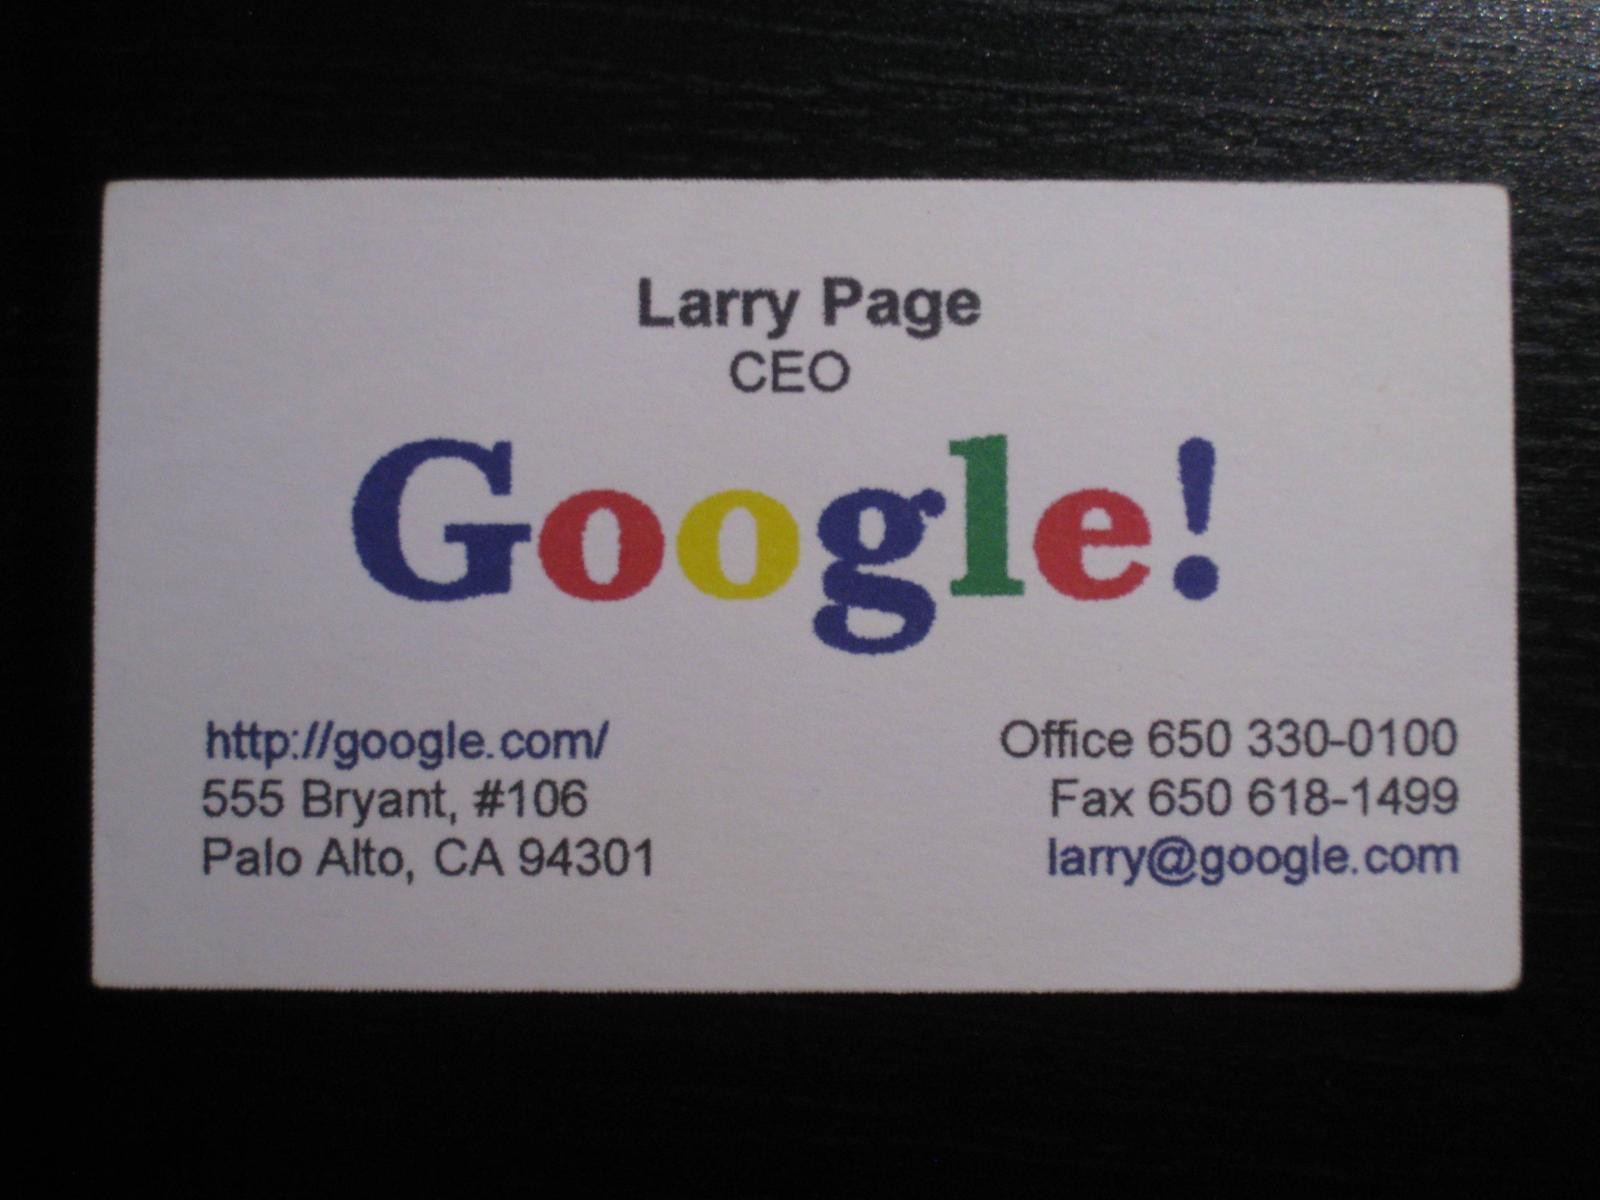 larry-page-google-ceo-business-card.jpg